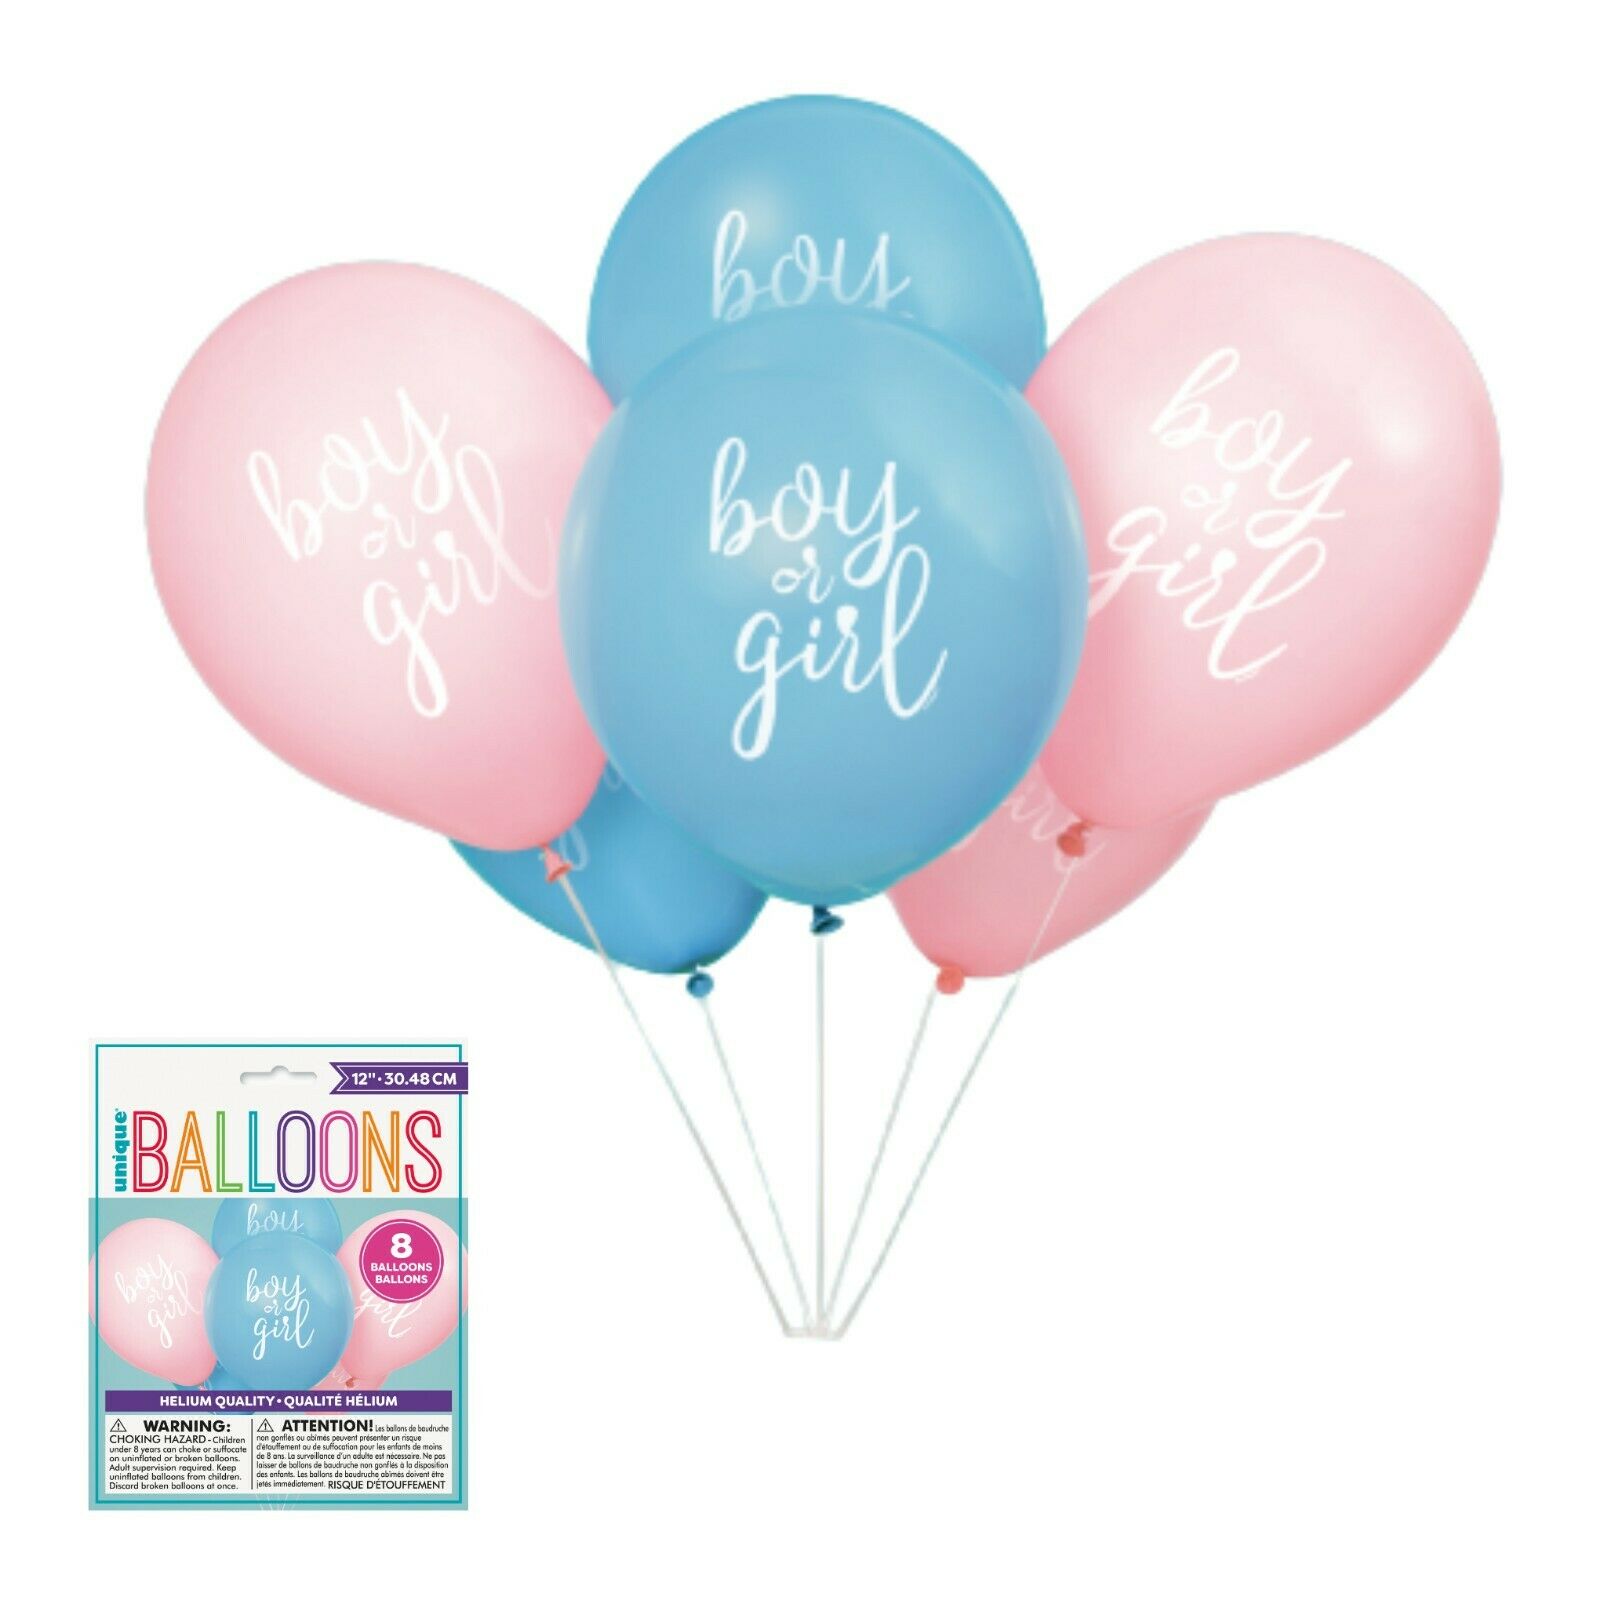 8 balloons Reveal, boy or girl  30 cm   2 colors